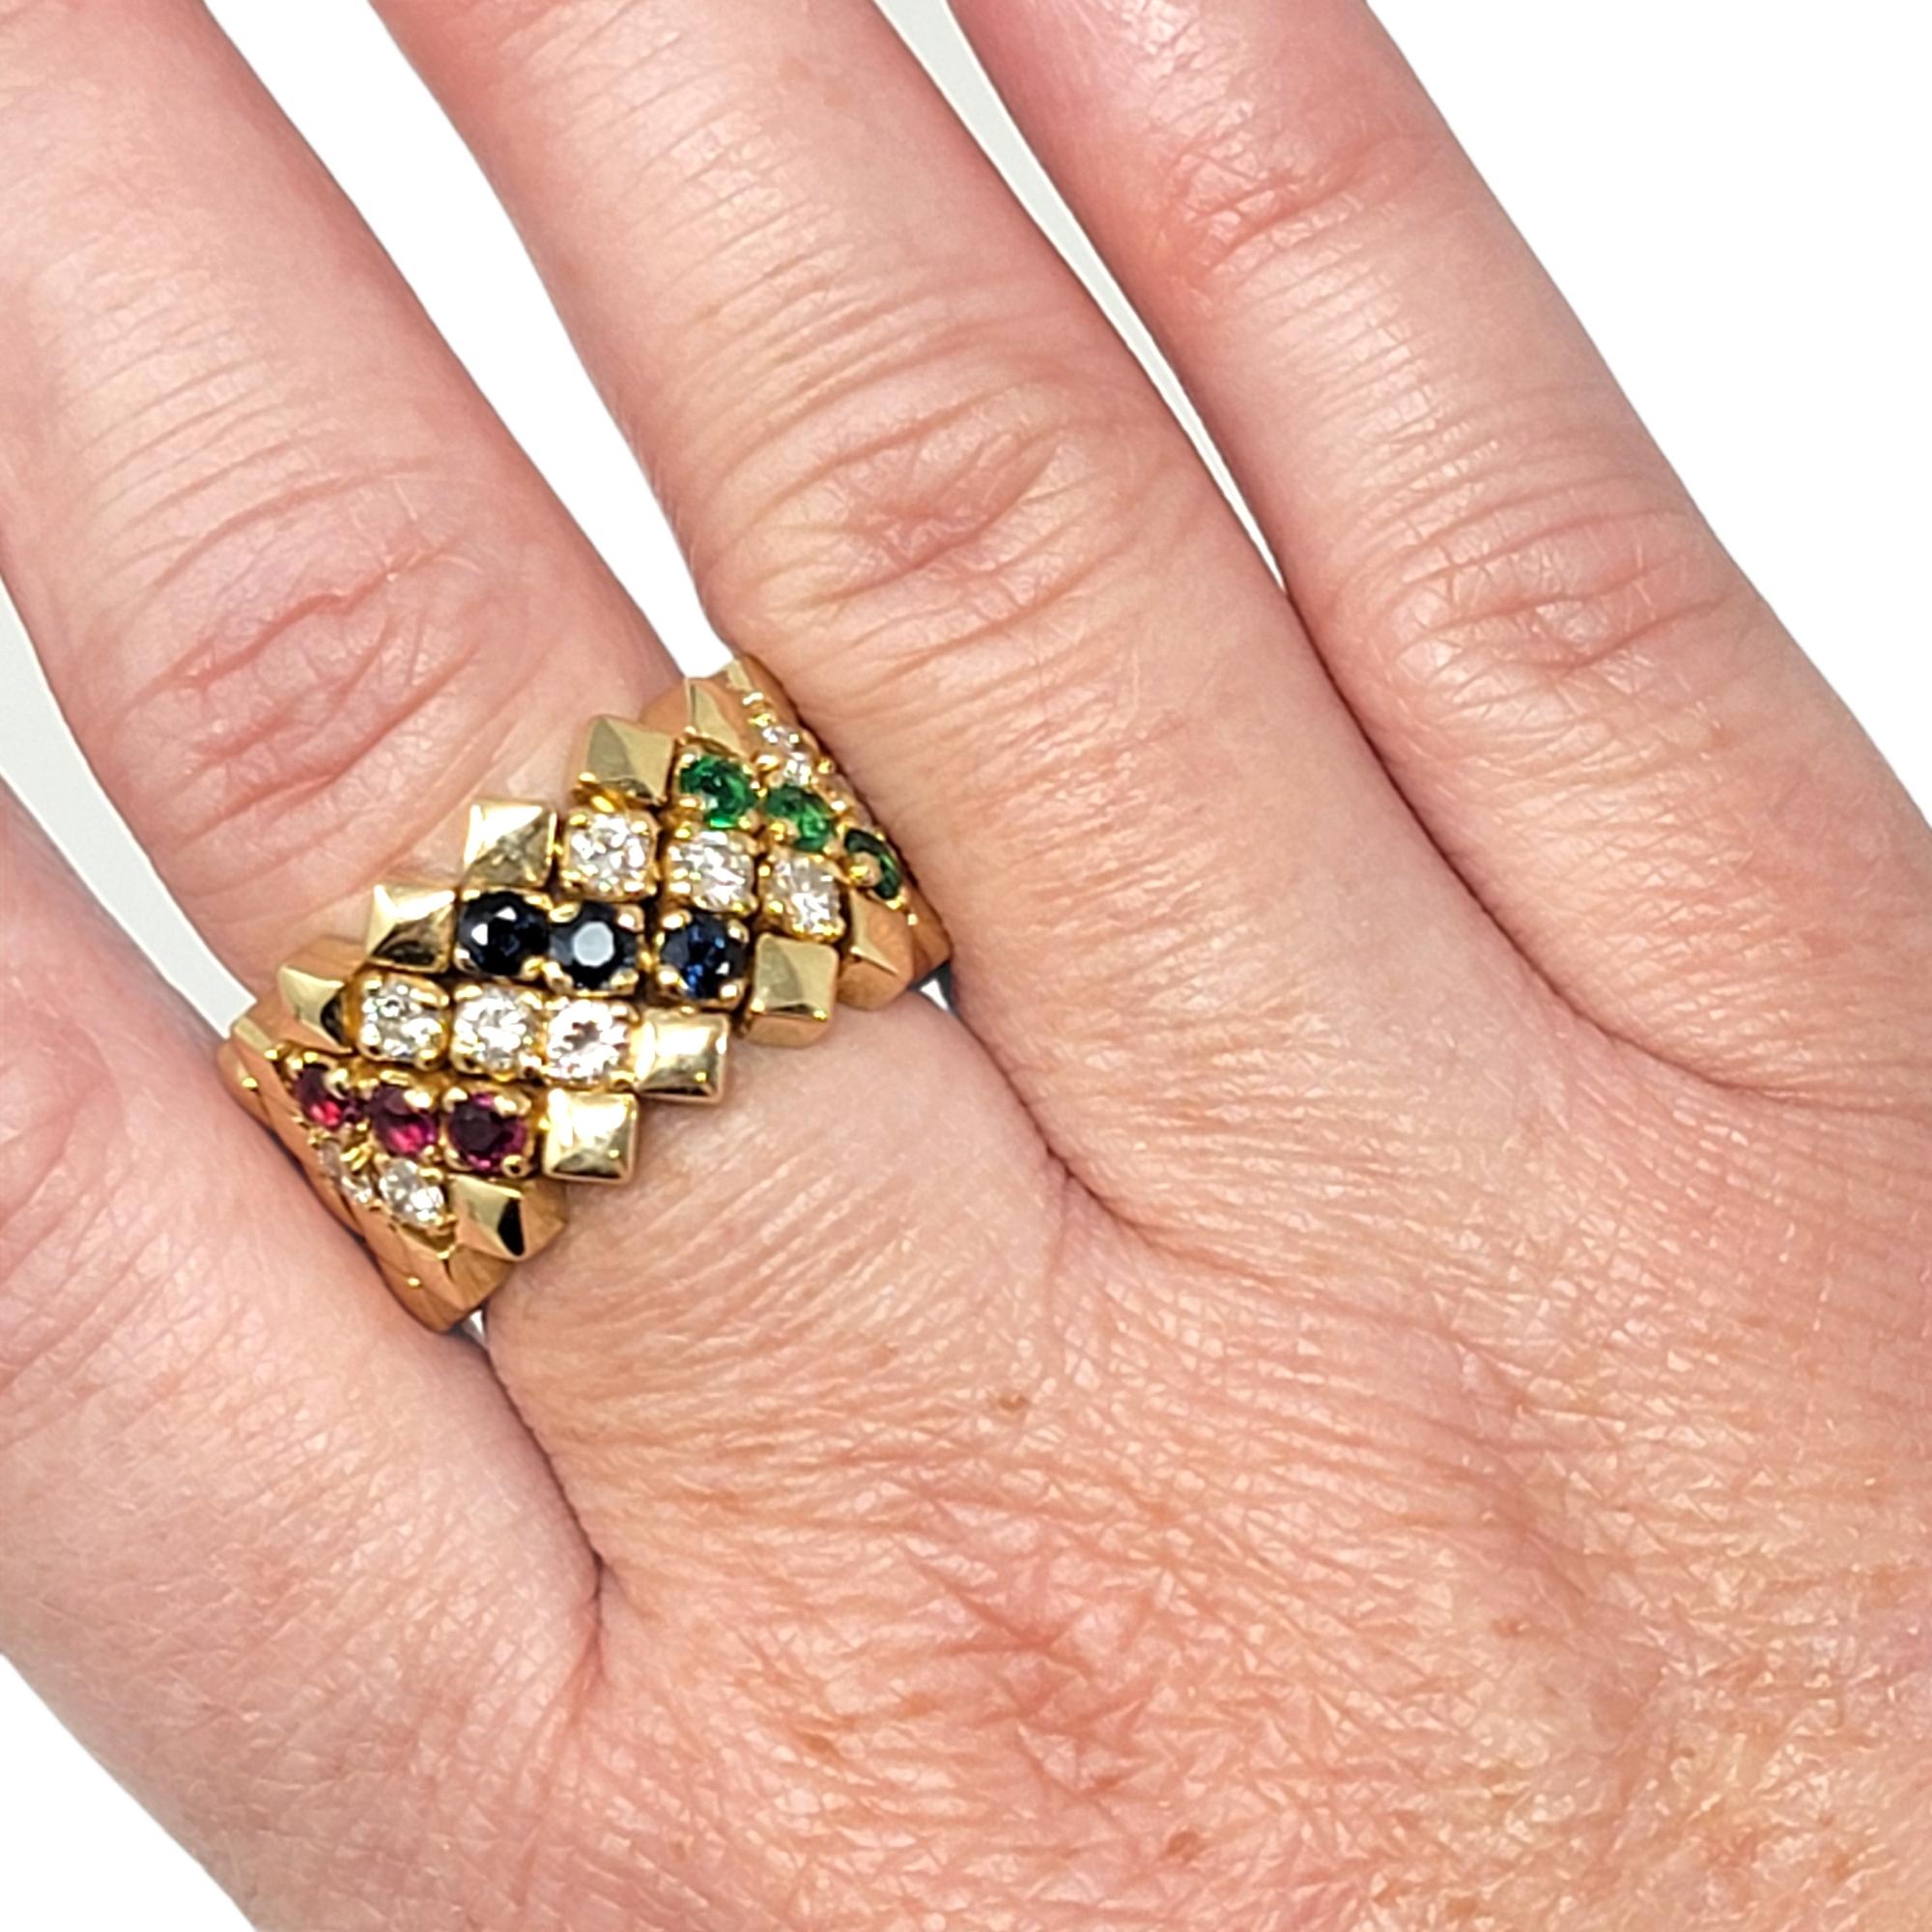 Beautiful multi-row link ring with a pretty pop of color and sparkle! This unique ring features 5 rows of polished 14 karat yellow gold diamond shaped links set in a flexible design. The front half of the ring is embellished with diagonal rows of